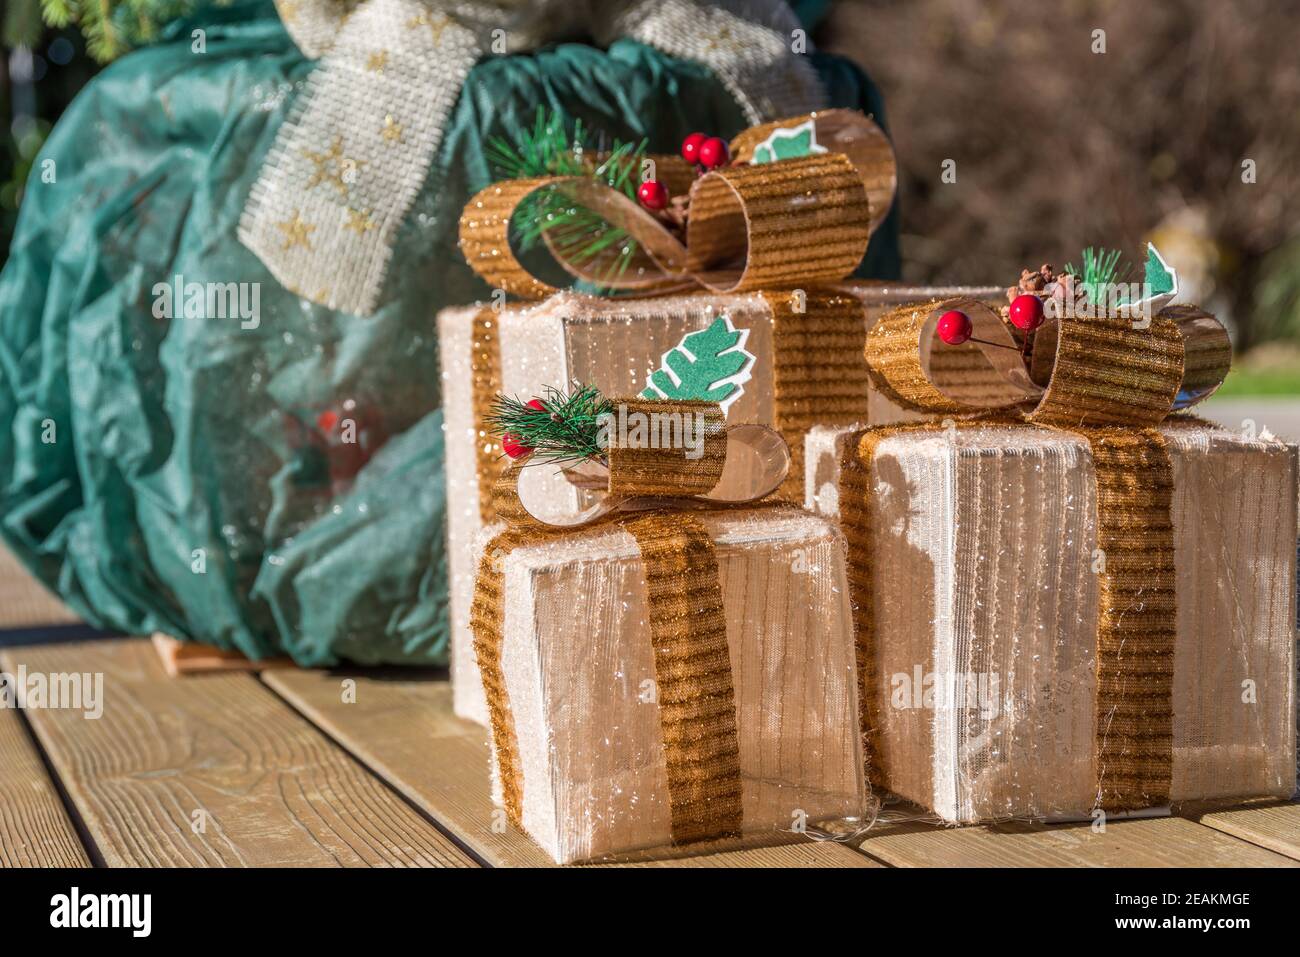 Christmas packages as garden decorations Stock Photo